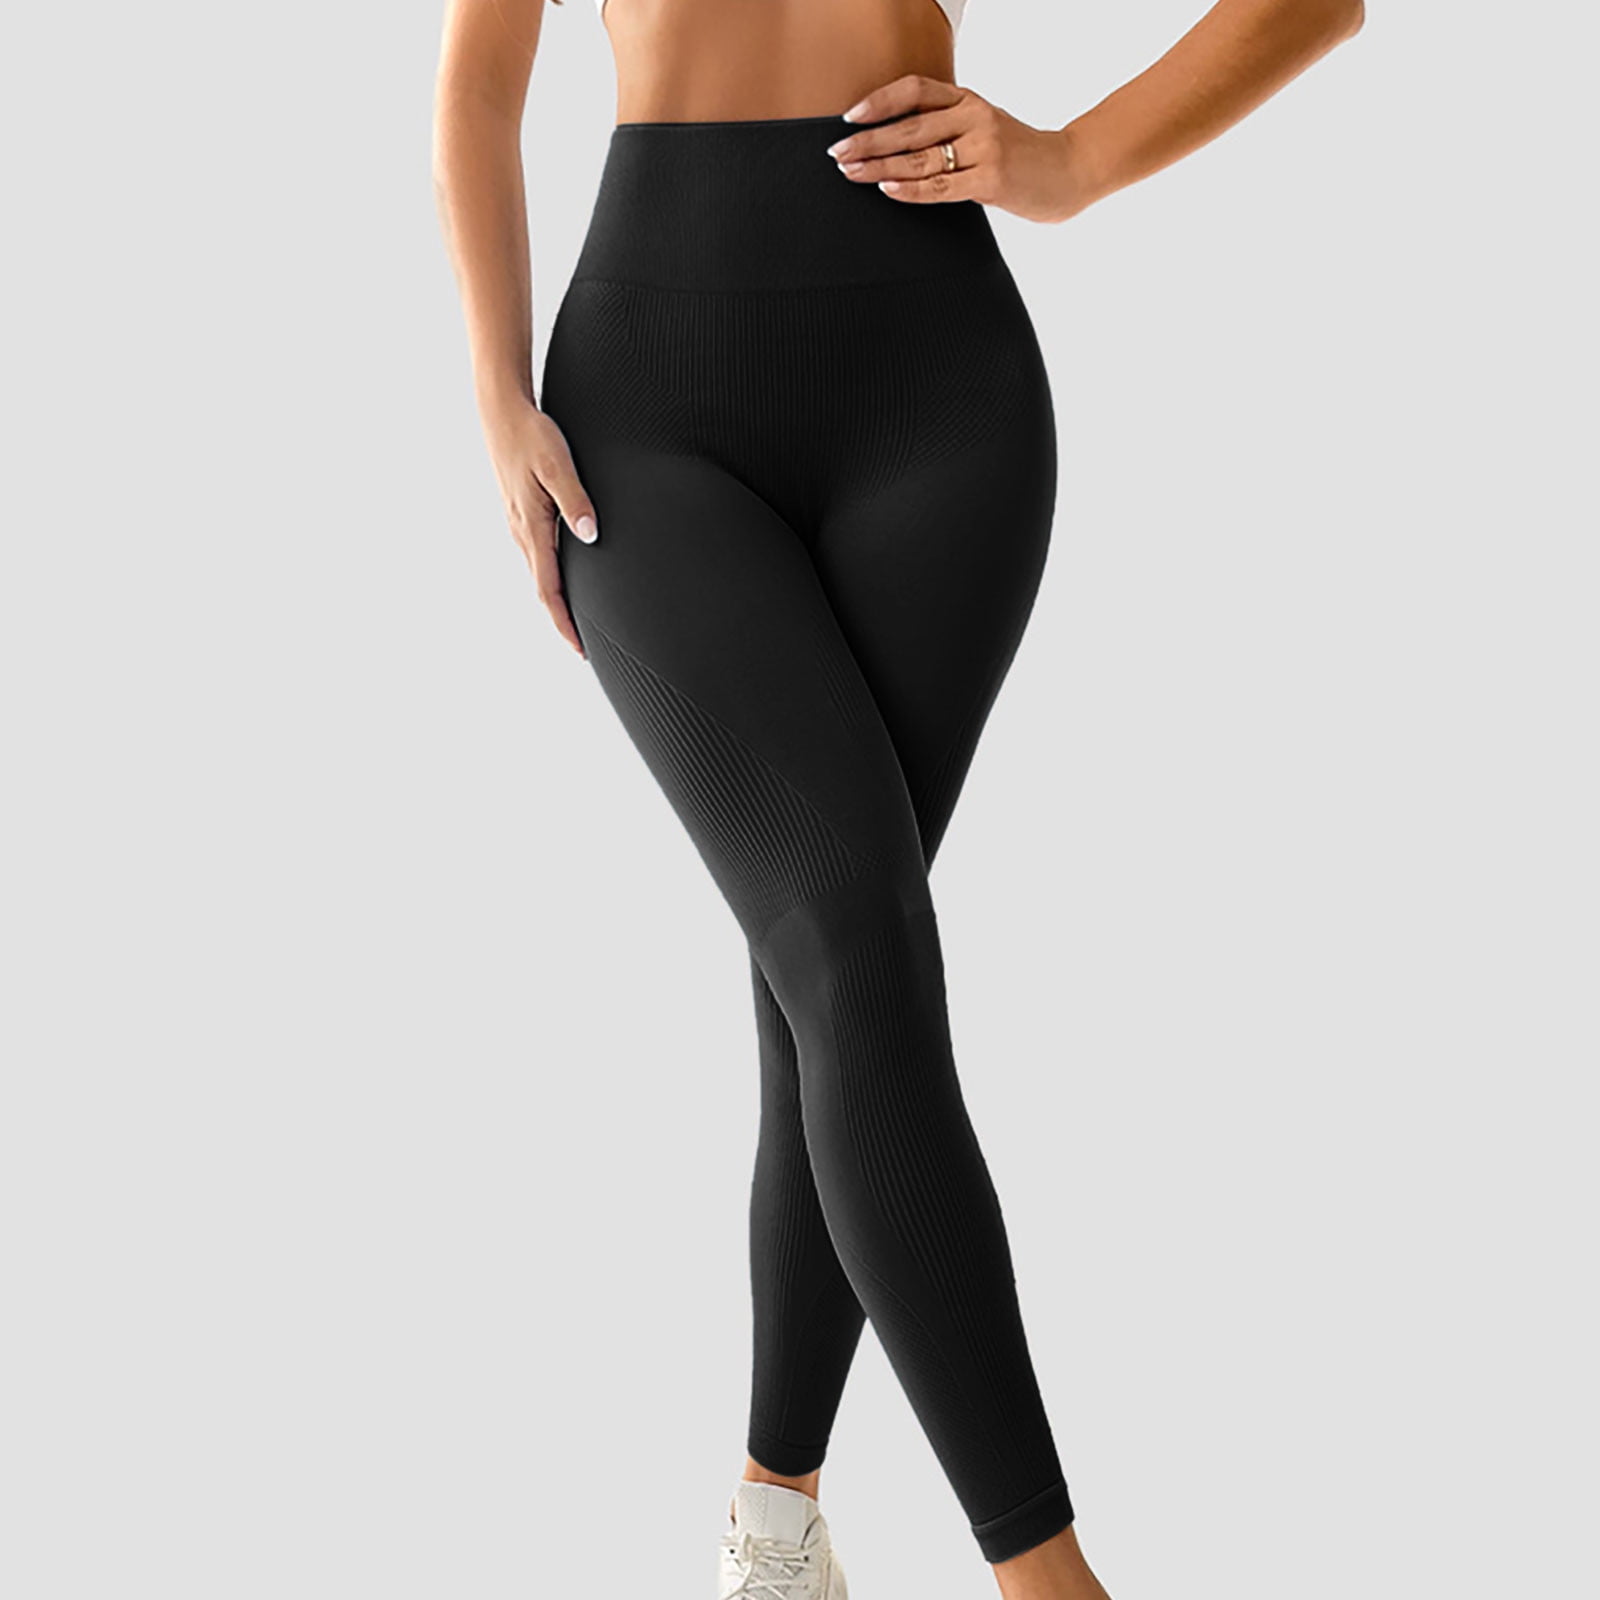 Lolmot Women's High Waist Workout Compression Seamless Fitness Yoga Leggings  Butt Lift Active Tights Stretch Tummy Control Yoga Pants 